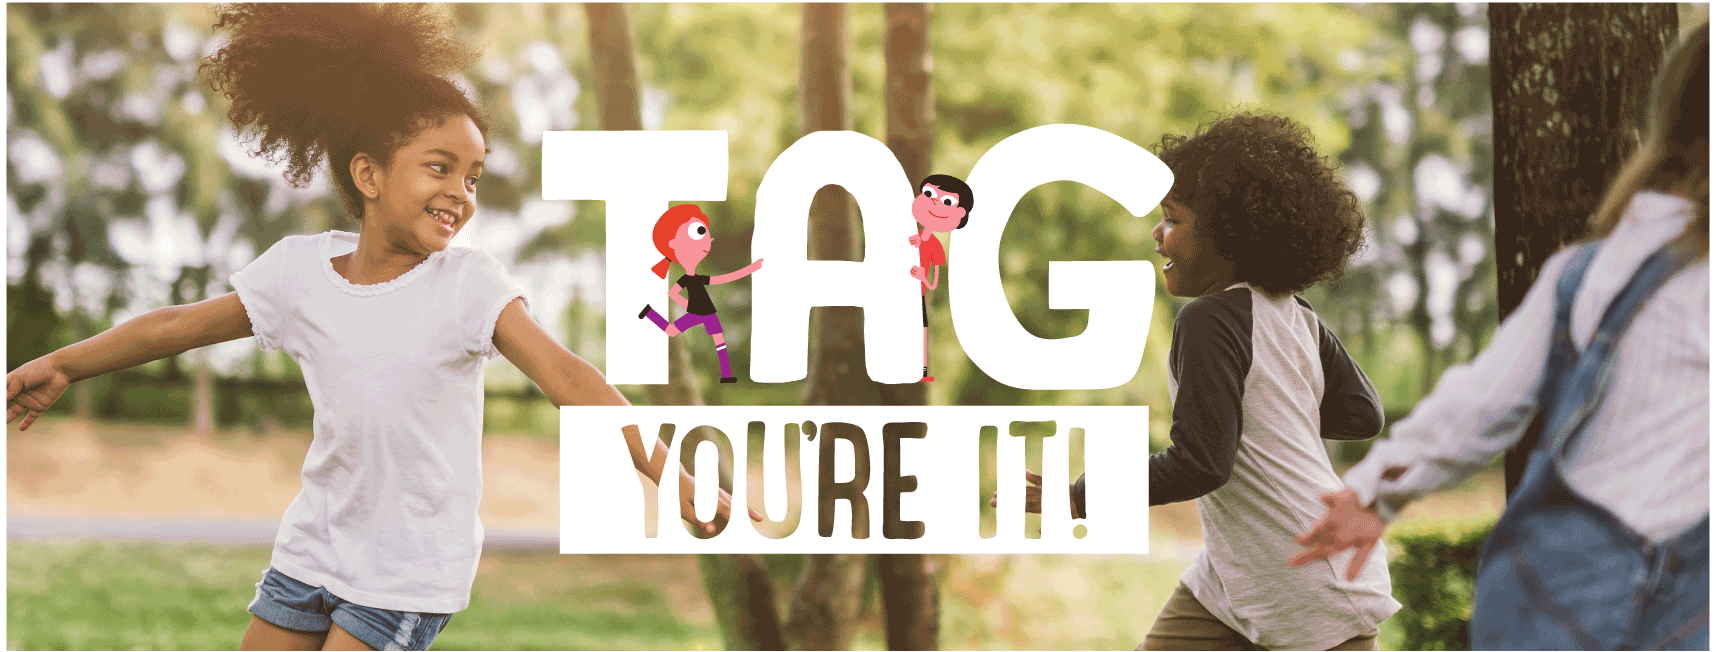 Tag You're It!